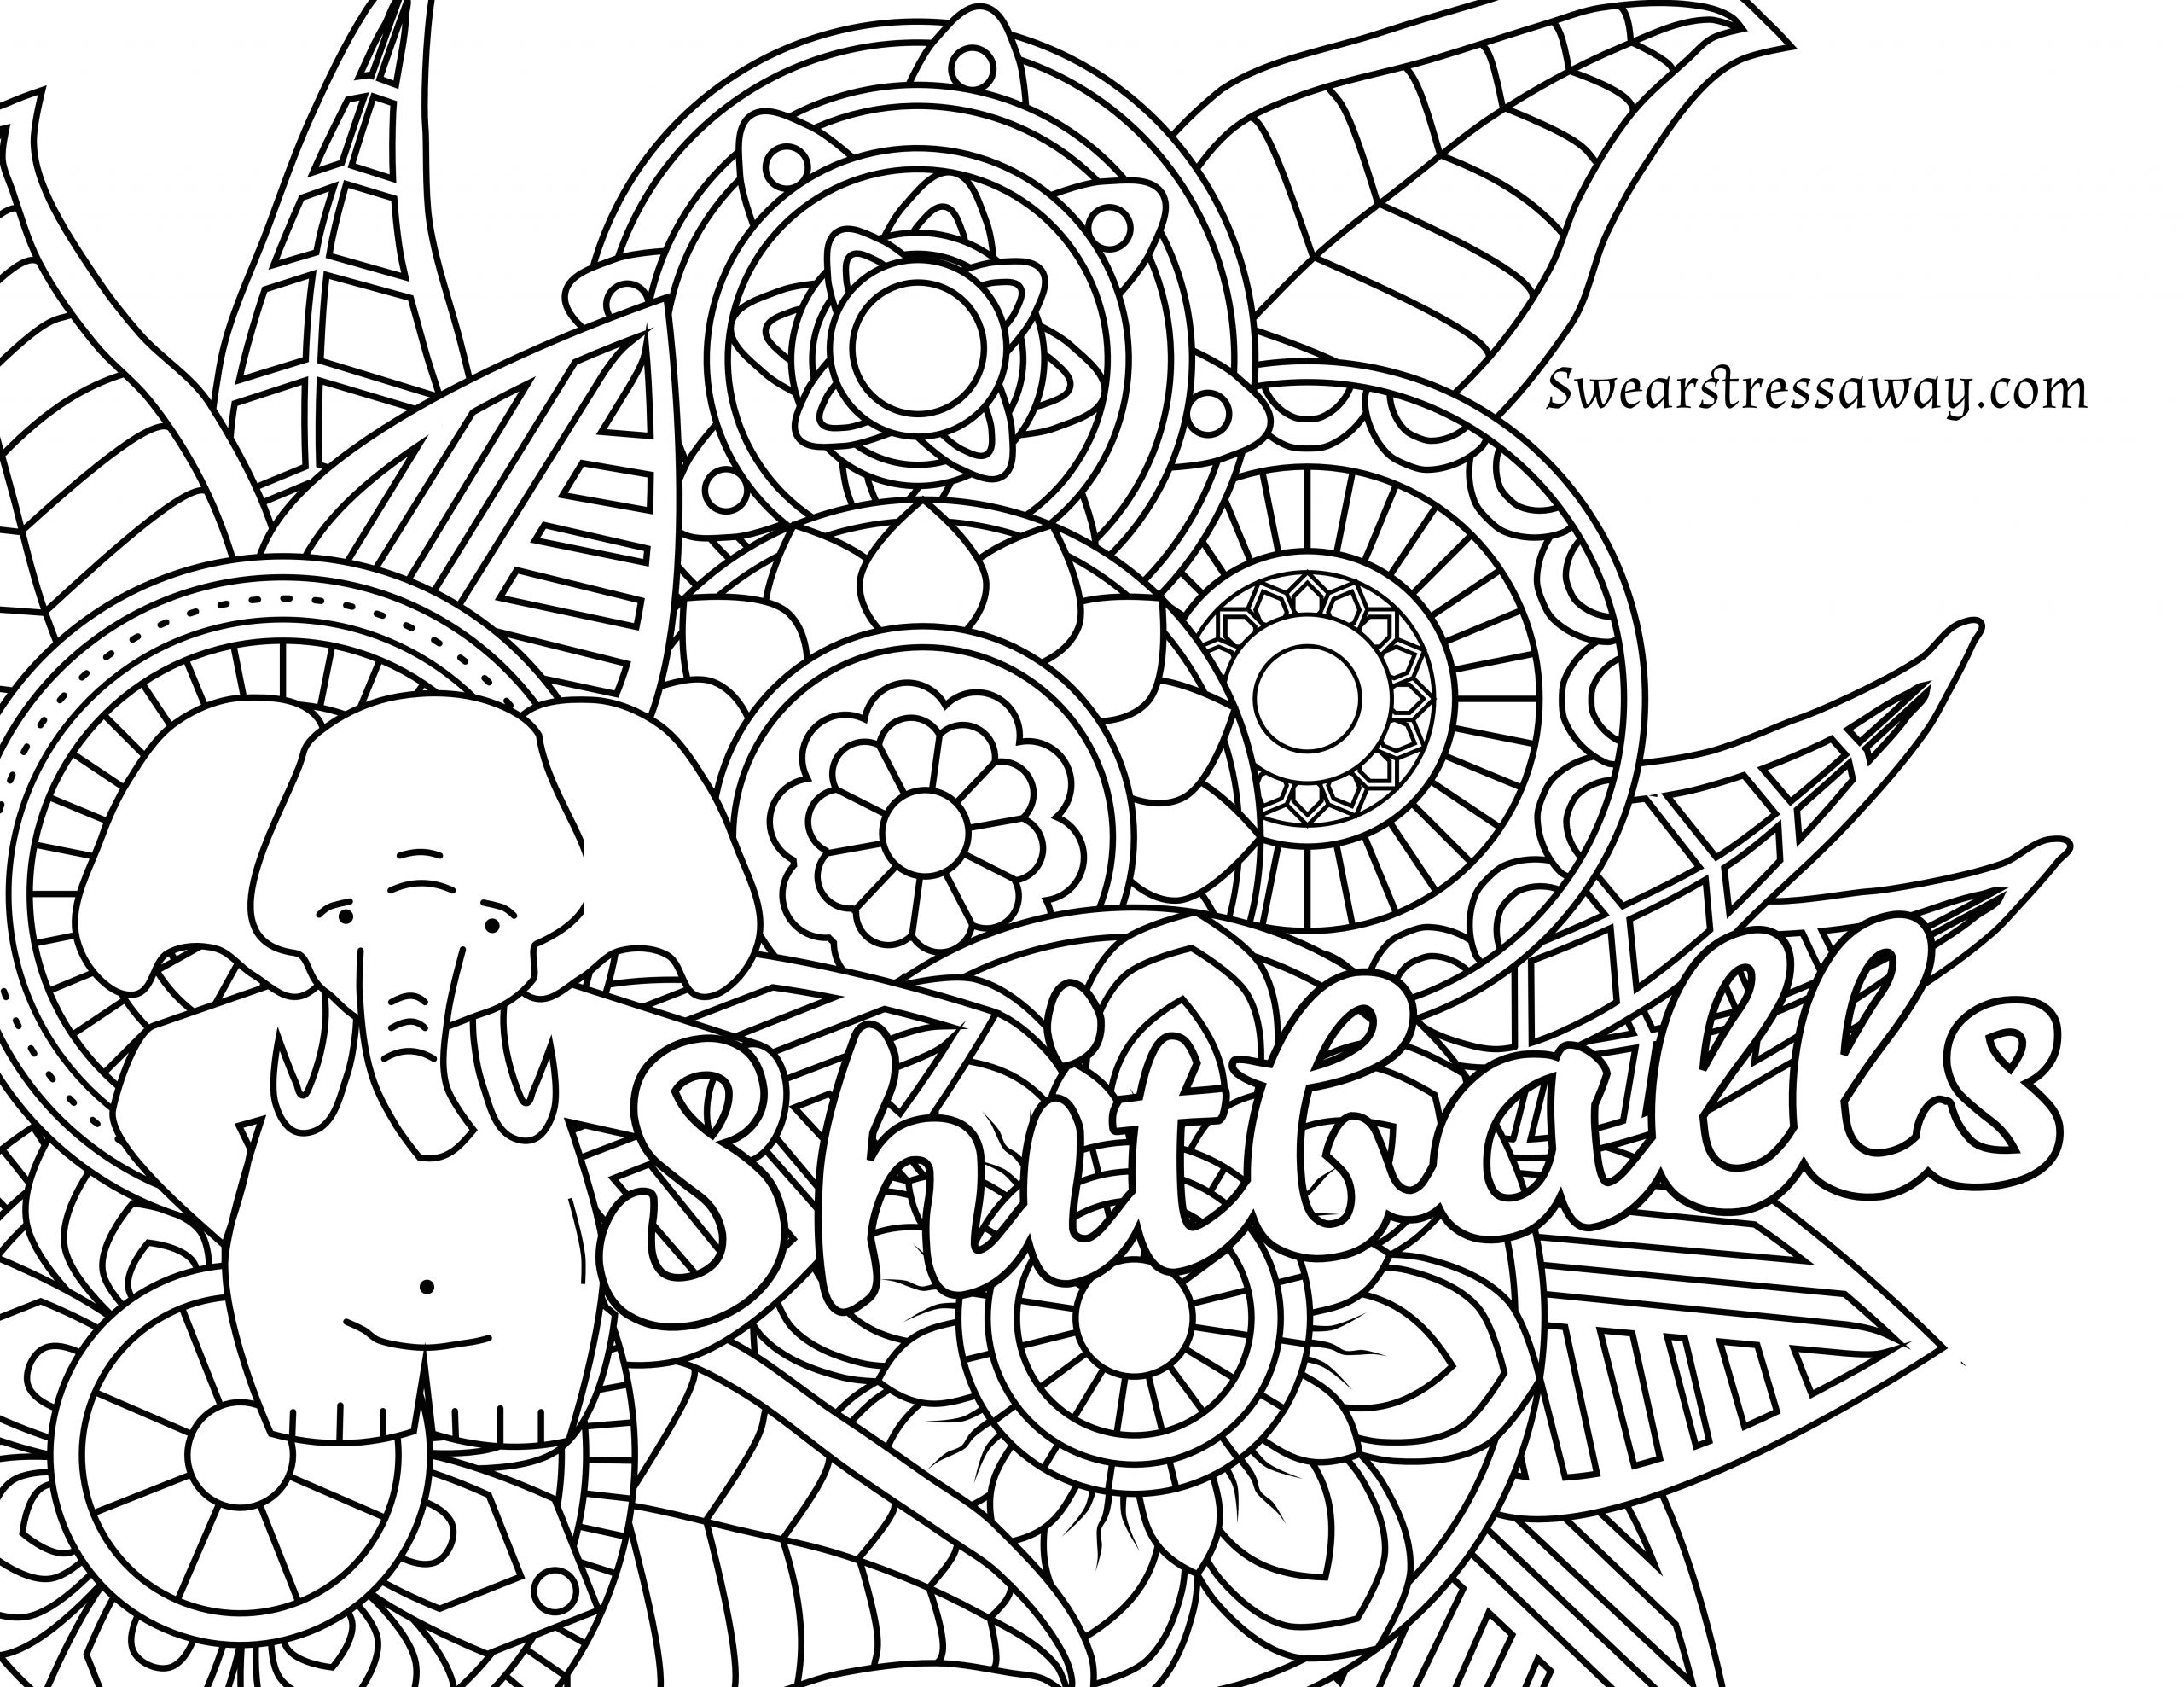 Adult Swear Coloring Pages
 Curse Word Free Coloring Pages